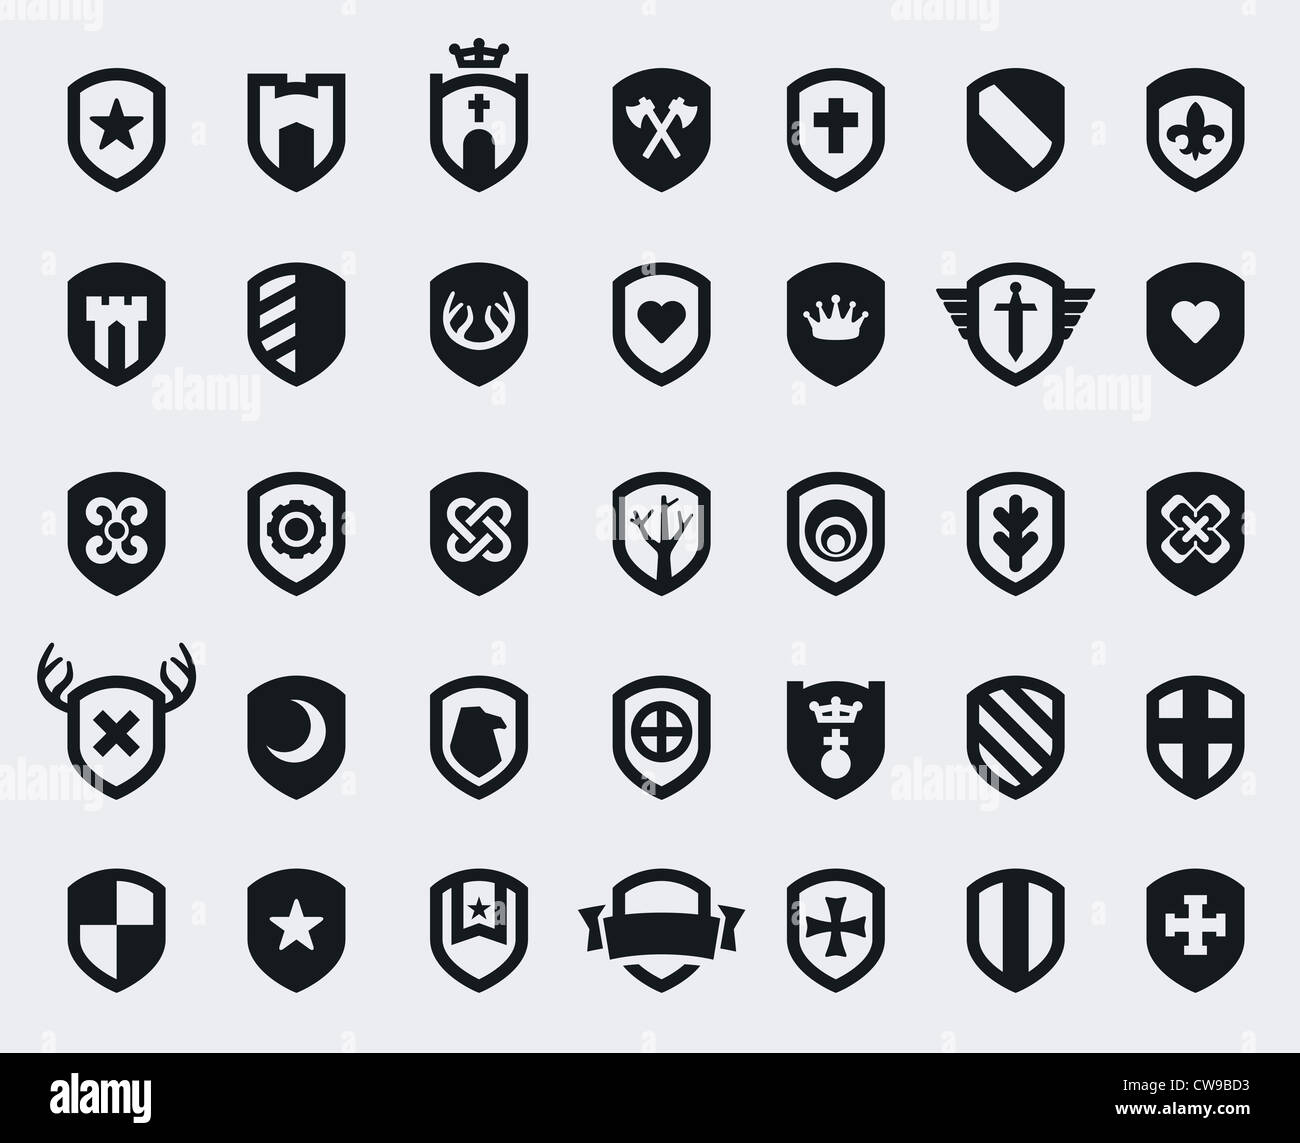 Set of 35 shield icons with various medieval and modern symbols Stock Photo